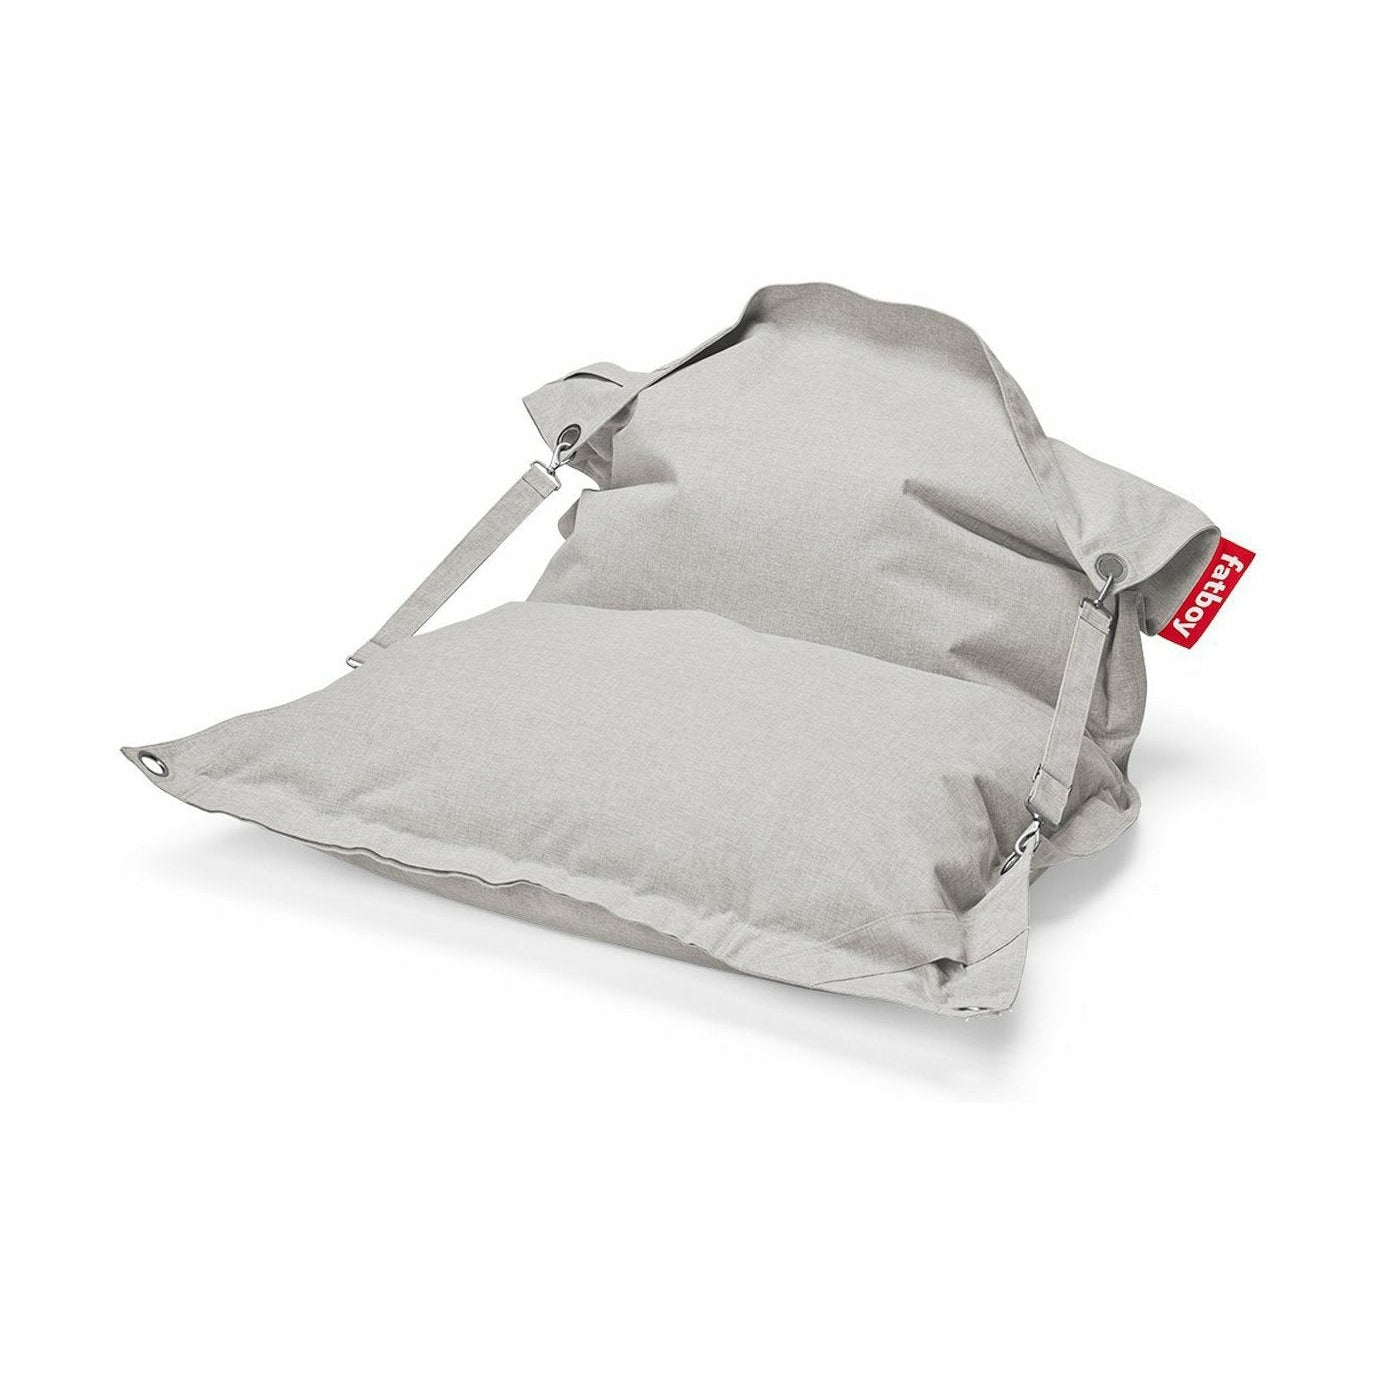 Fatboy Buggle Up Outdoor Beanbag, Mist